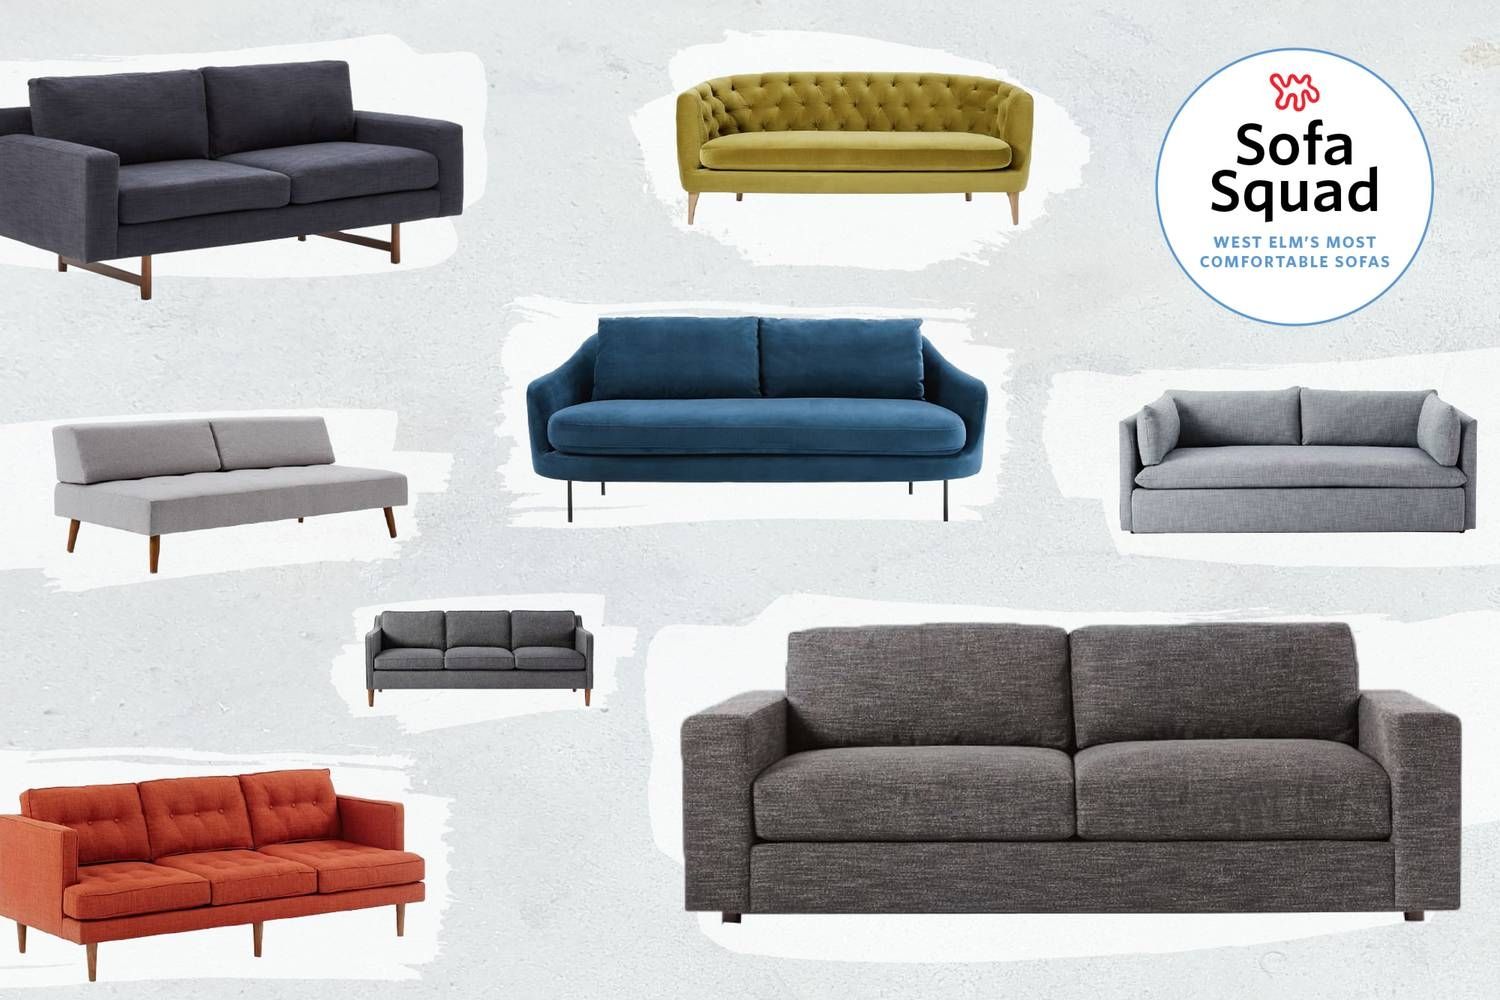 Furniture: Henry Sectional West Elm Reviews | West Elm Sofa With Regard To West Elm Henry Sectional Sofas (View 9 of 15)